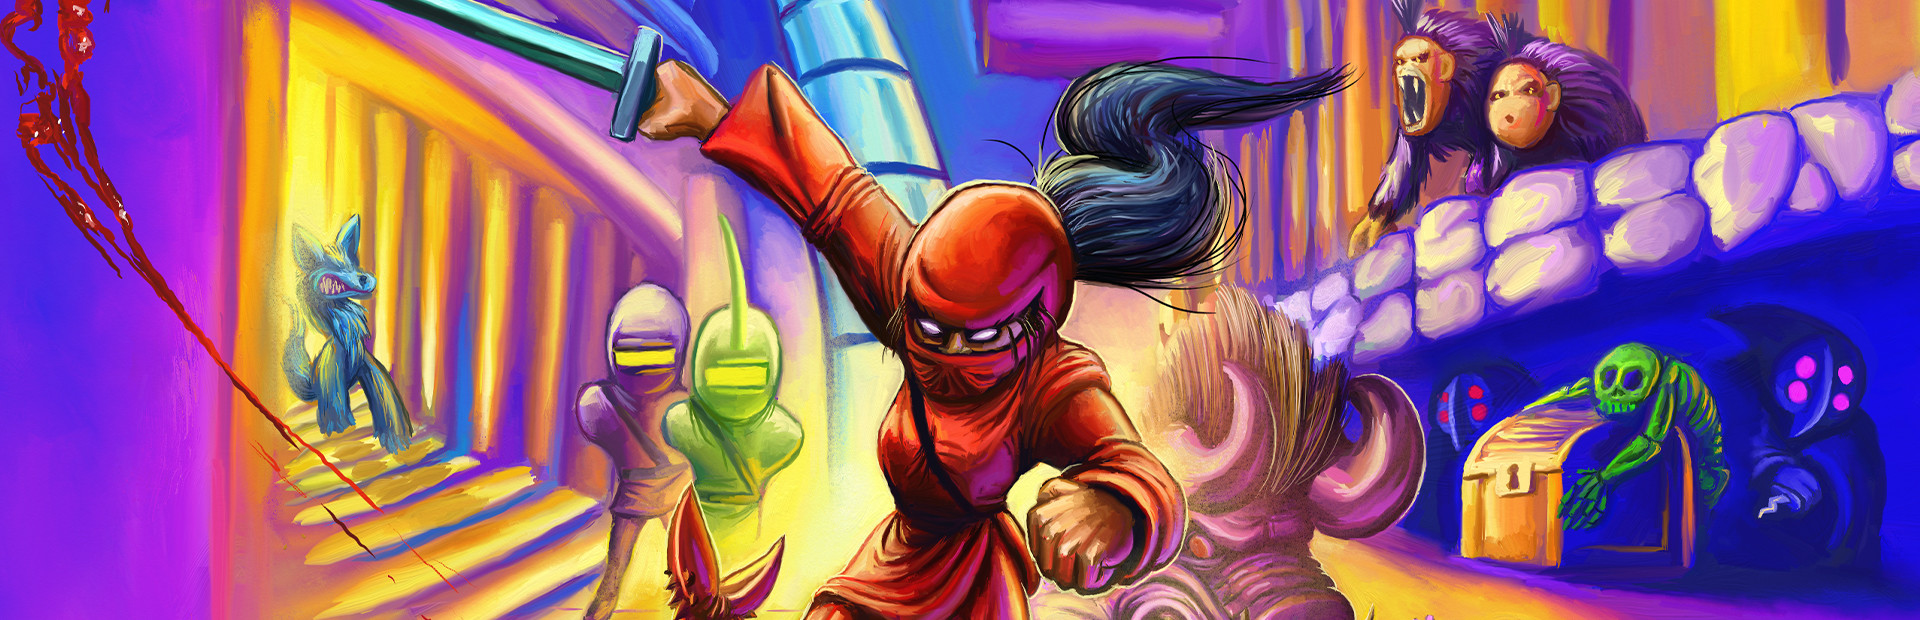 Super House of Dead Ninjas cover image